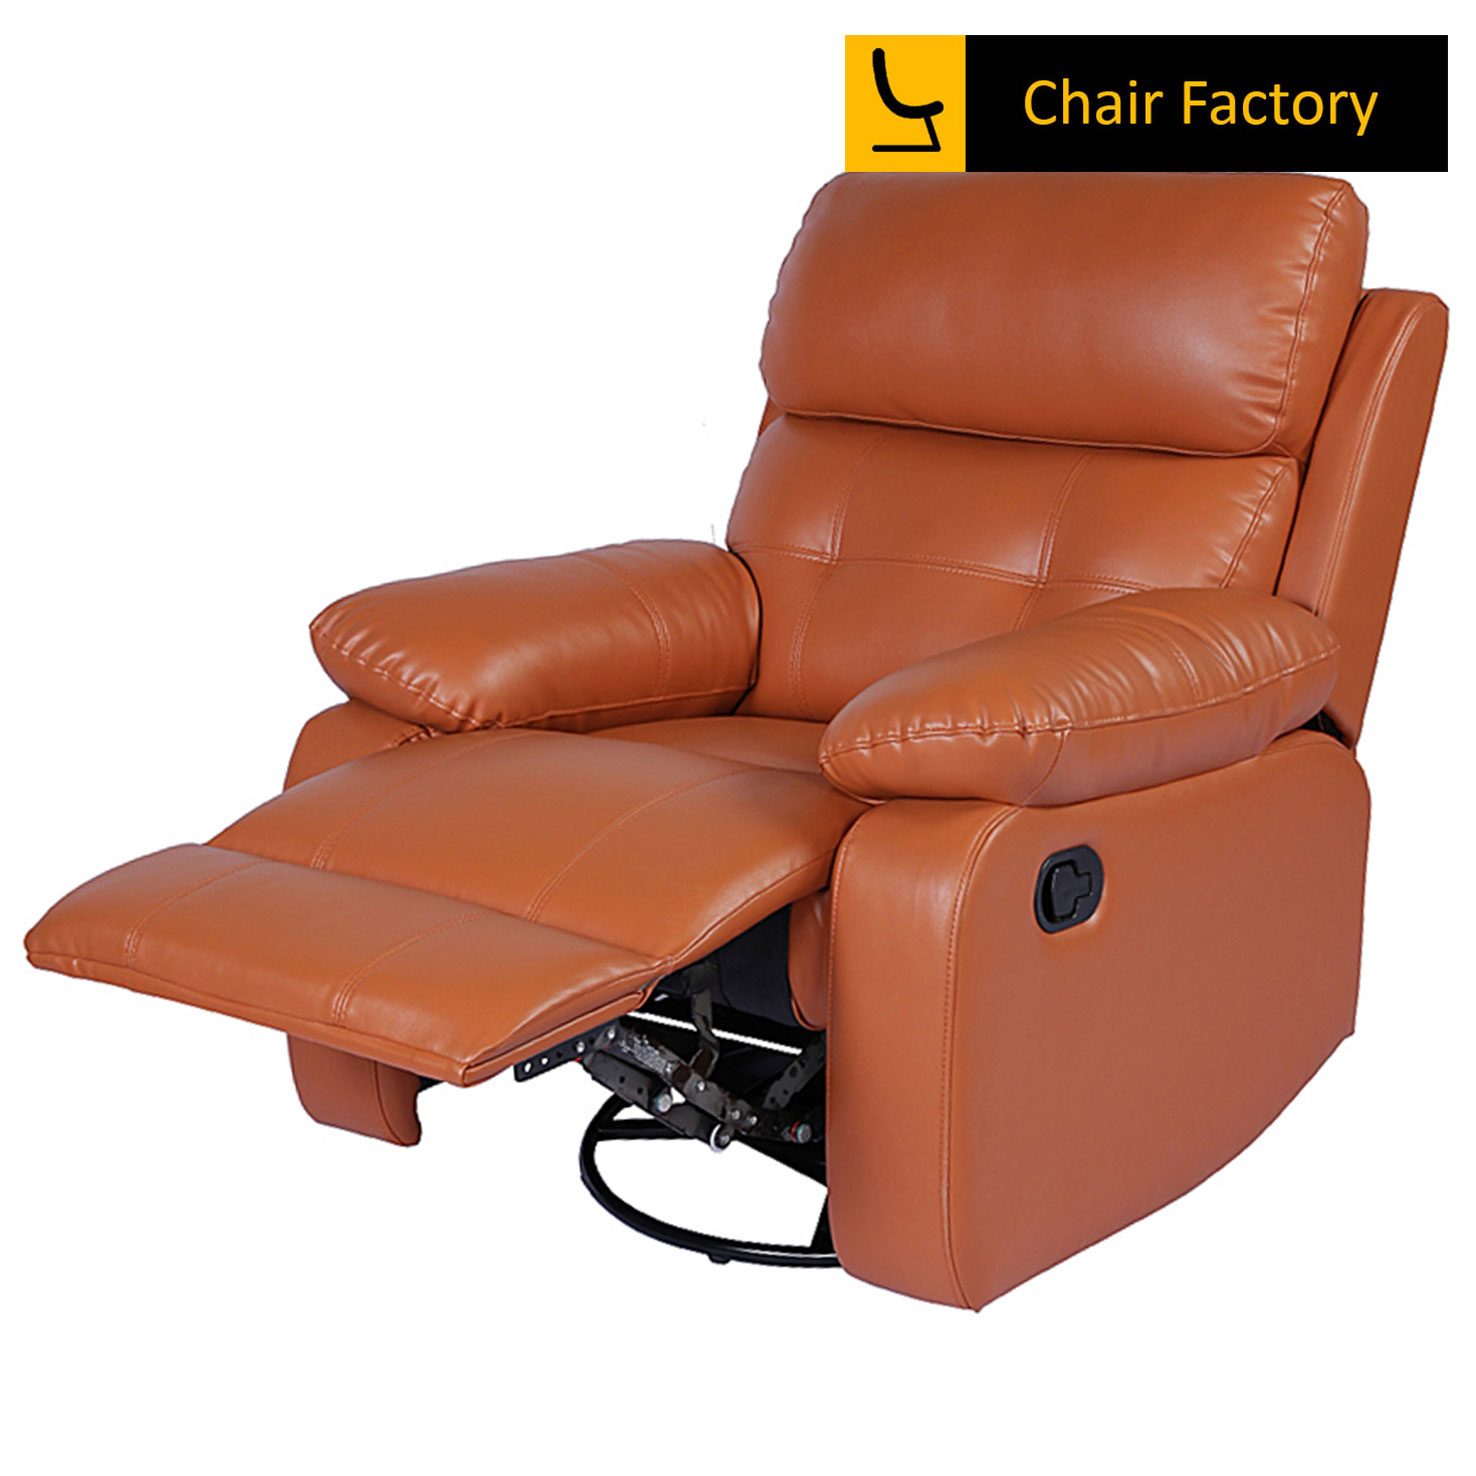 Abington Brown Leather Recliner Chair